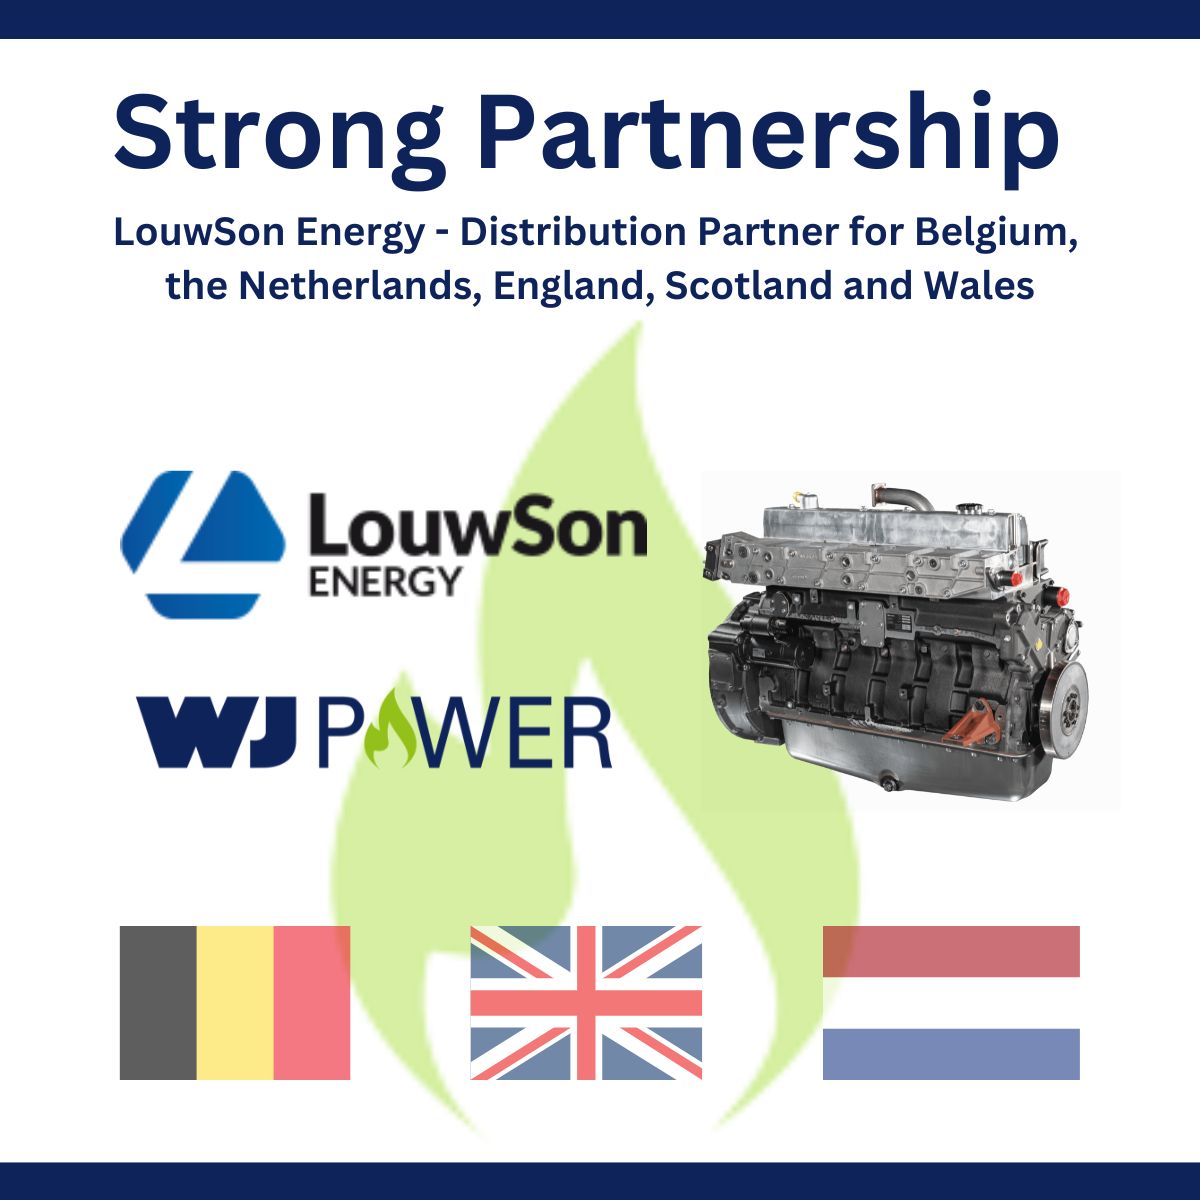 Strong Partnership with LouwSon Energy